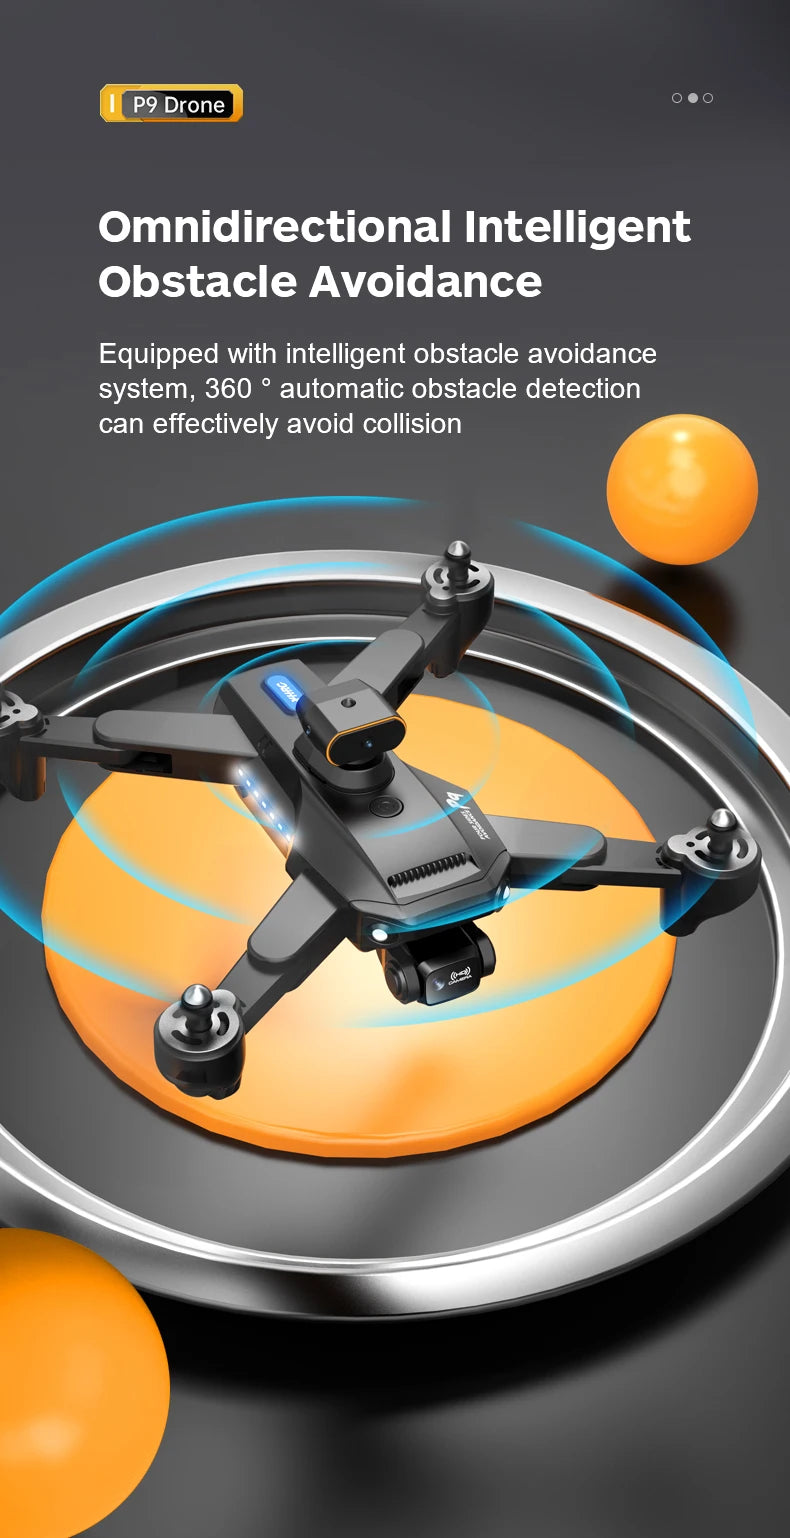 P9 Drone, p9 drone omnidirectional intelligent obstacle avoidance system .